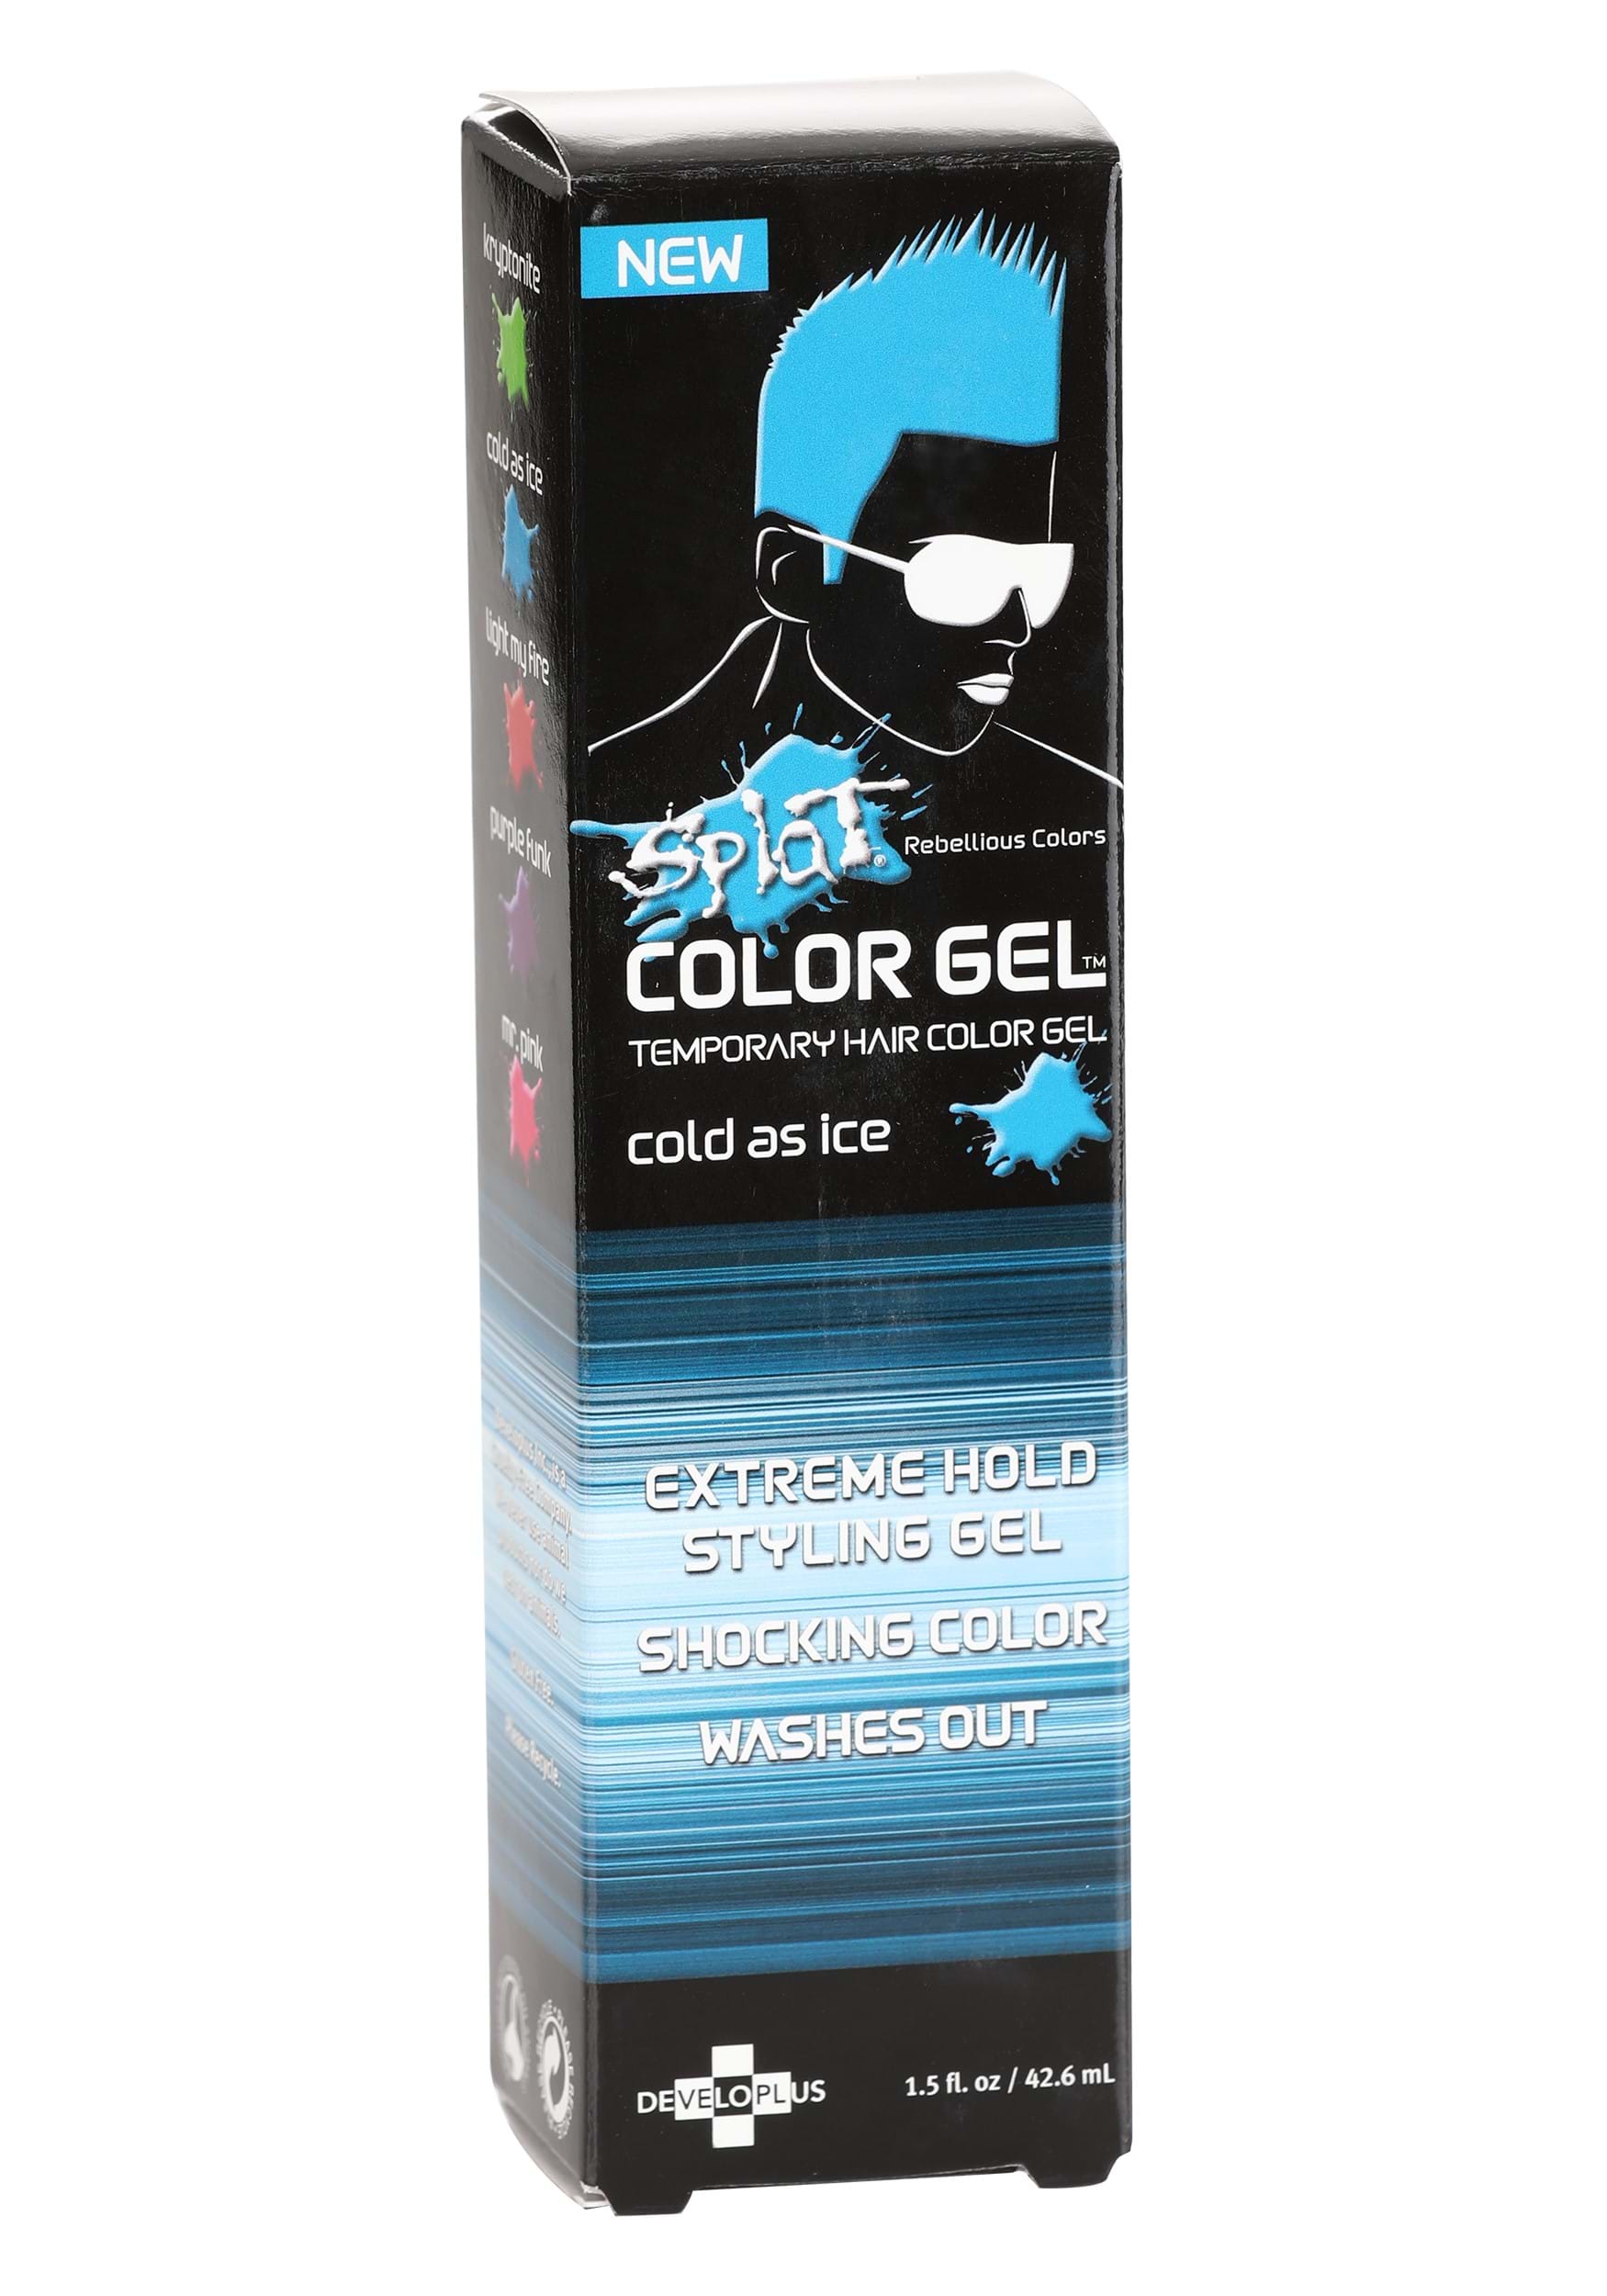 https://images.halloweencostumes.com.au/products/87276/1-1/temporary-color-styling-gel-in-blue.jpg